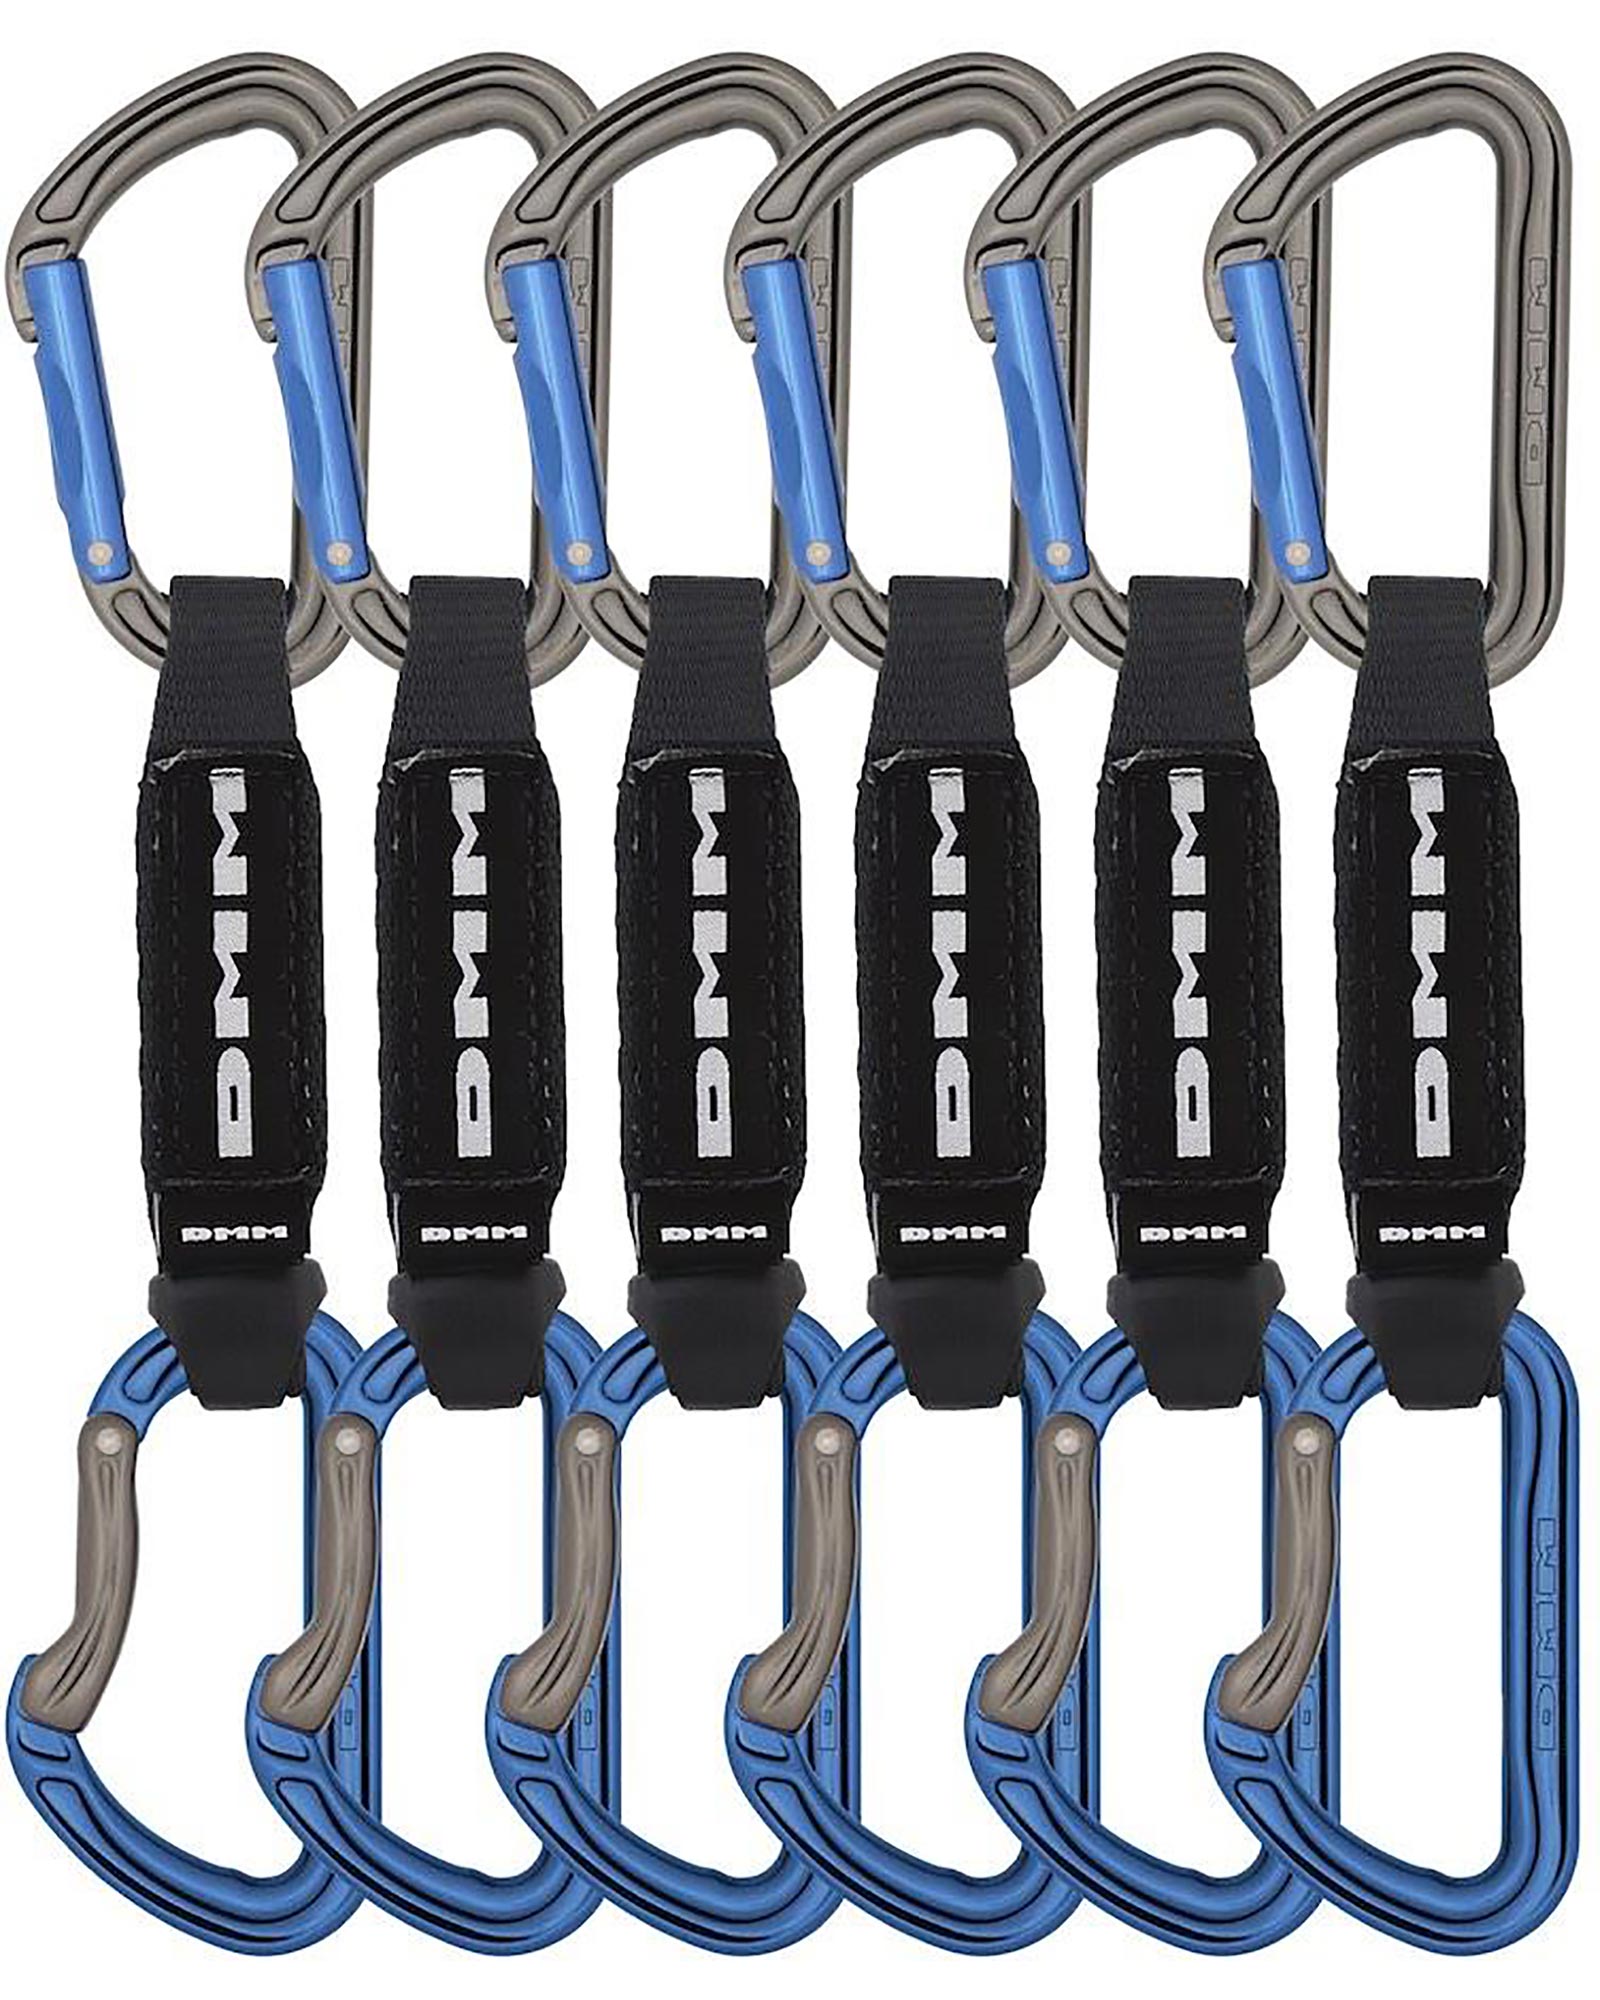 Dmm Shadow Quickdraw 12cm - 6 Pack